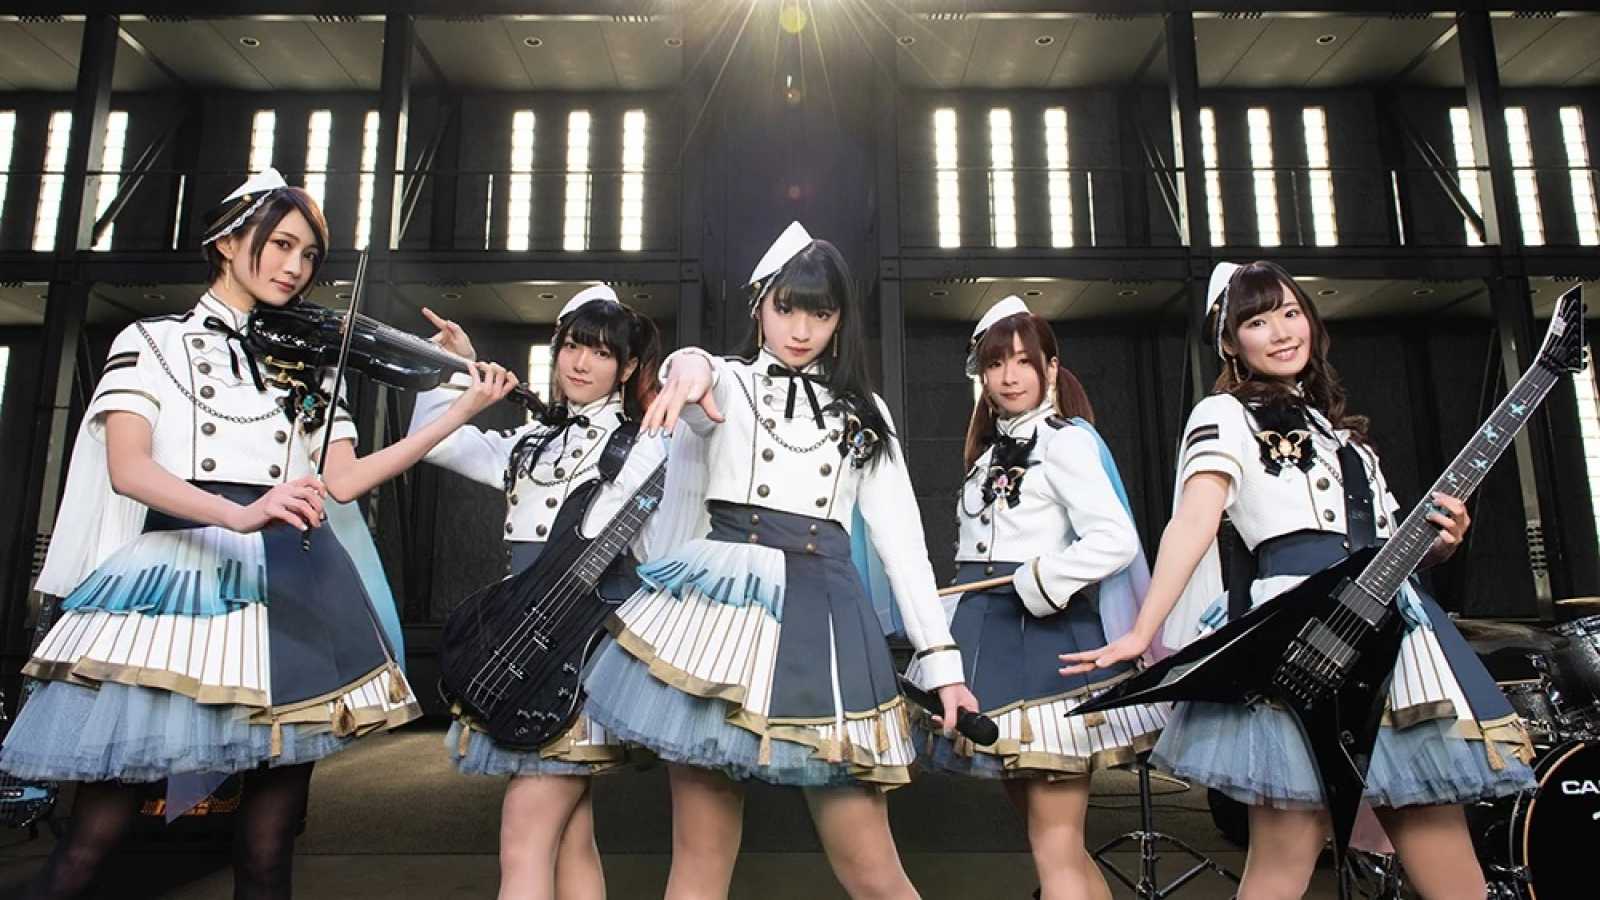 Morfonica anuncia novo single © Bushiroad Music. All Rights Reserved.